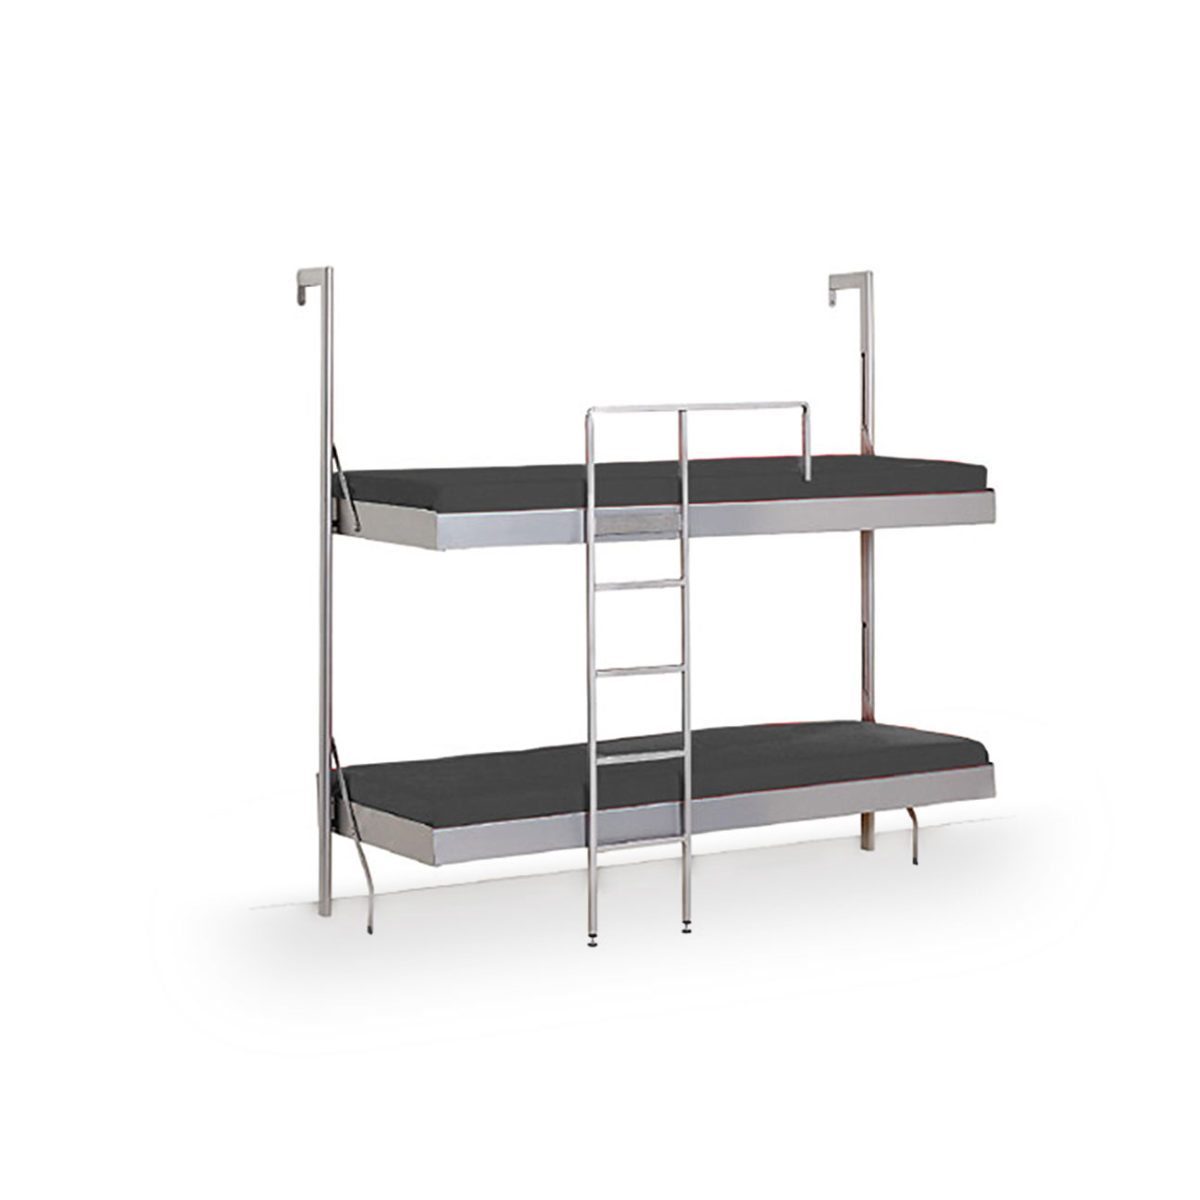 Compatto Murphy Bunk Bed From Italy, Side Fold Murphy Bunk Bed